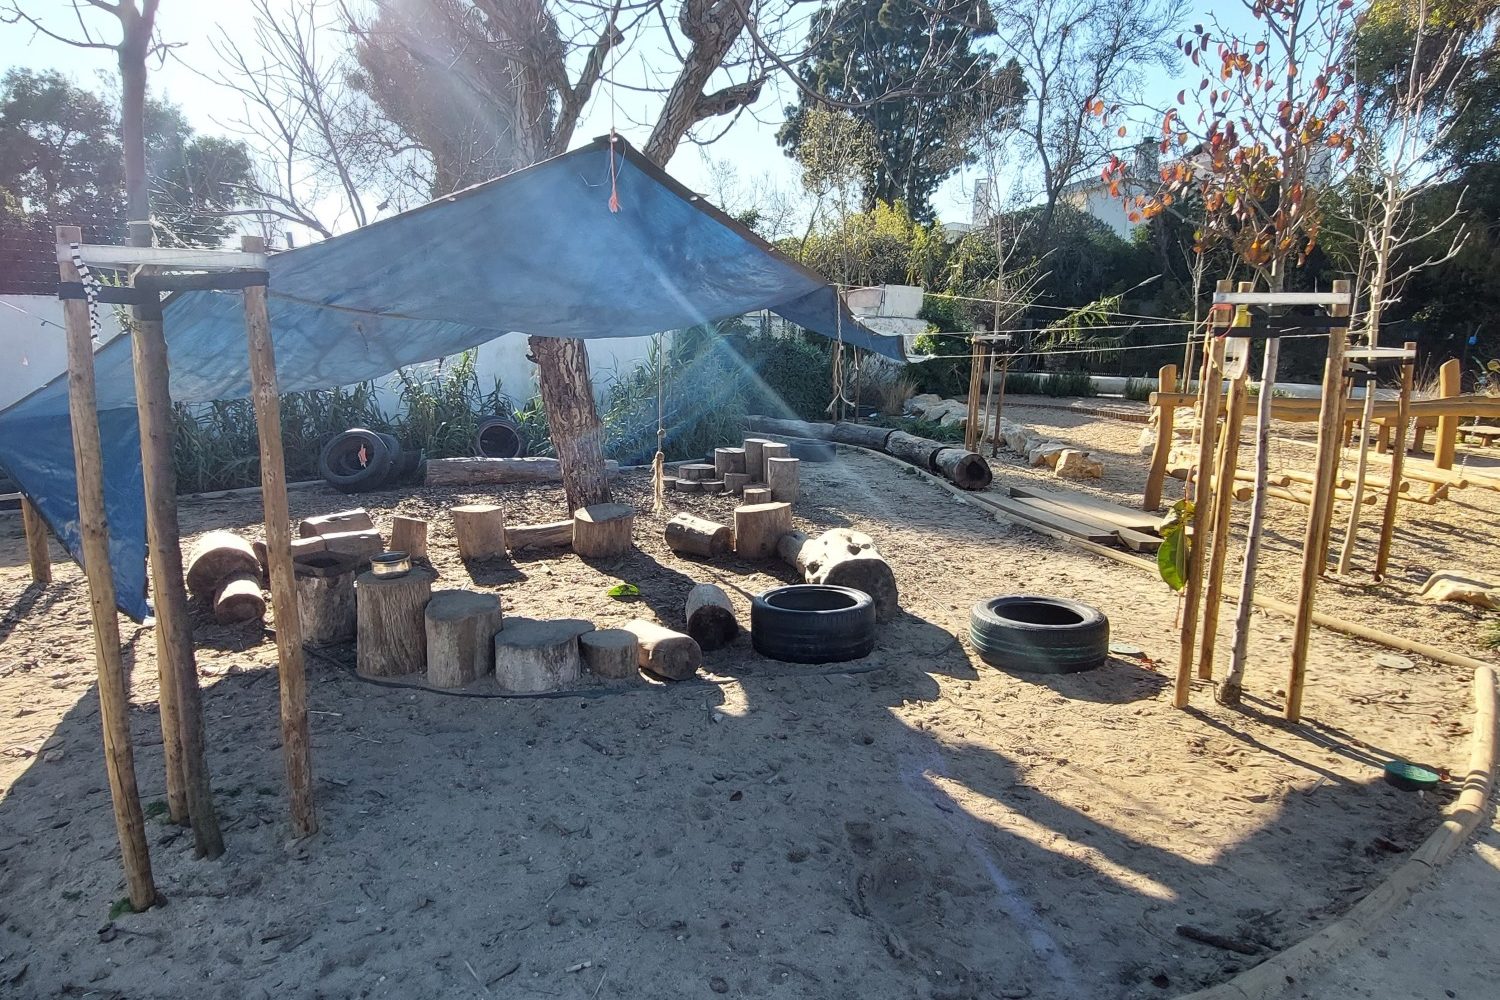 Log seating with a canopy to provide shelter from the sun in a sandy area of some climate ready school grounds.